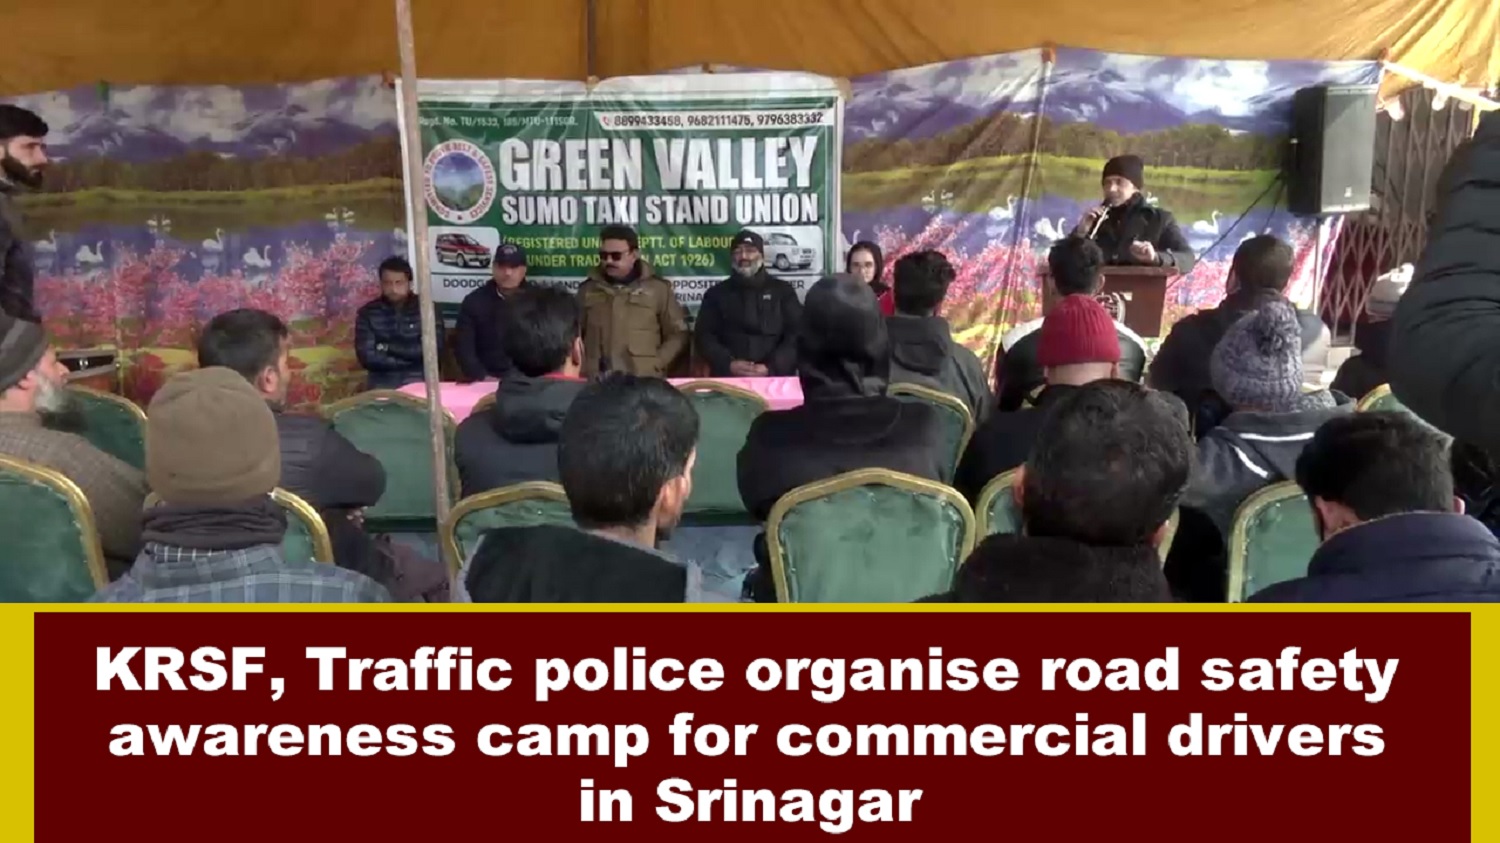 KRSF, Traffic police organise road safety awareness camp for commercial drivers in Srinagar